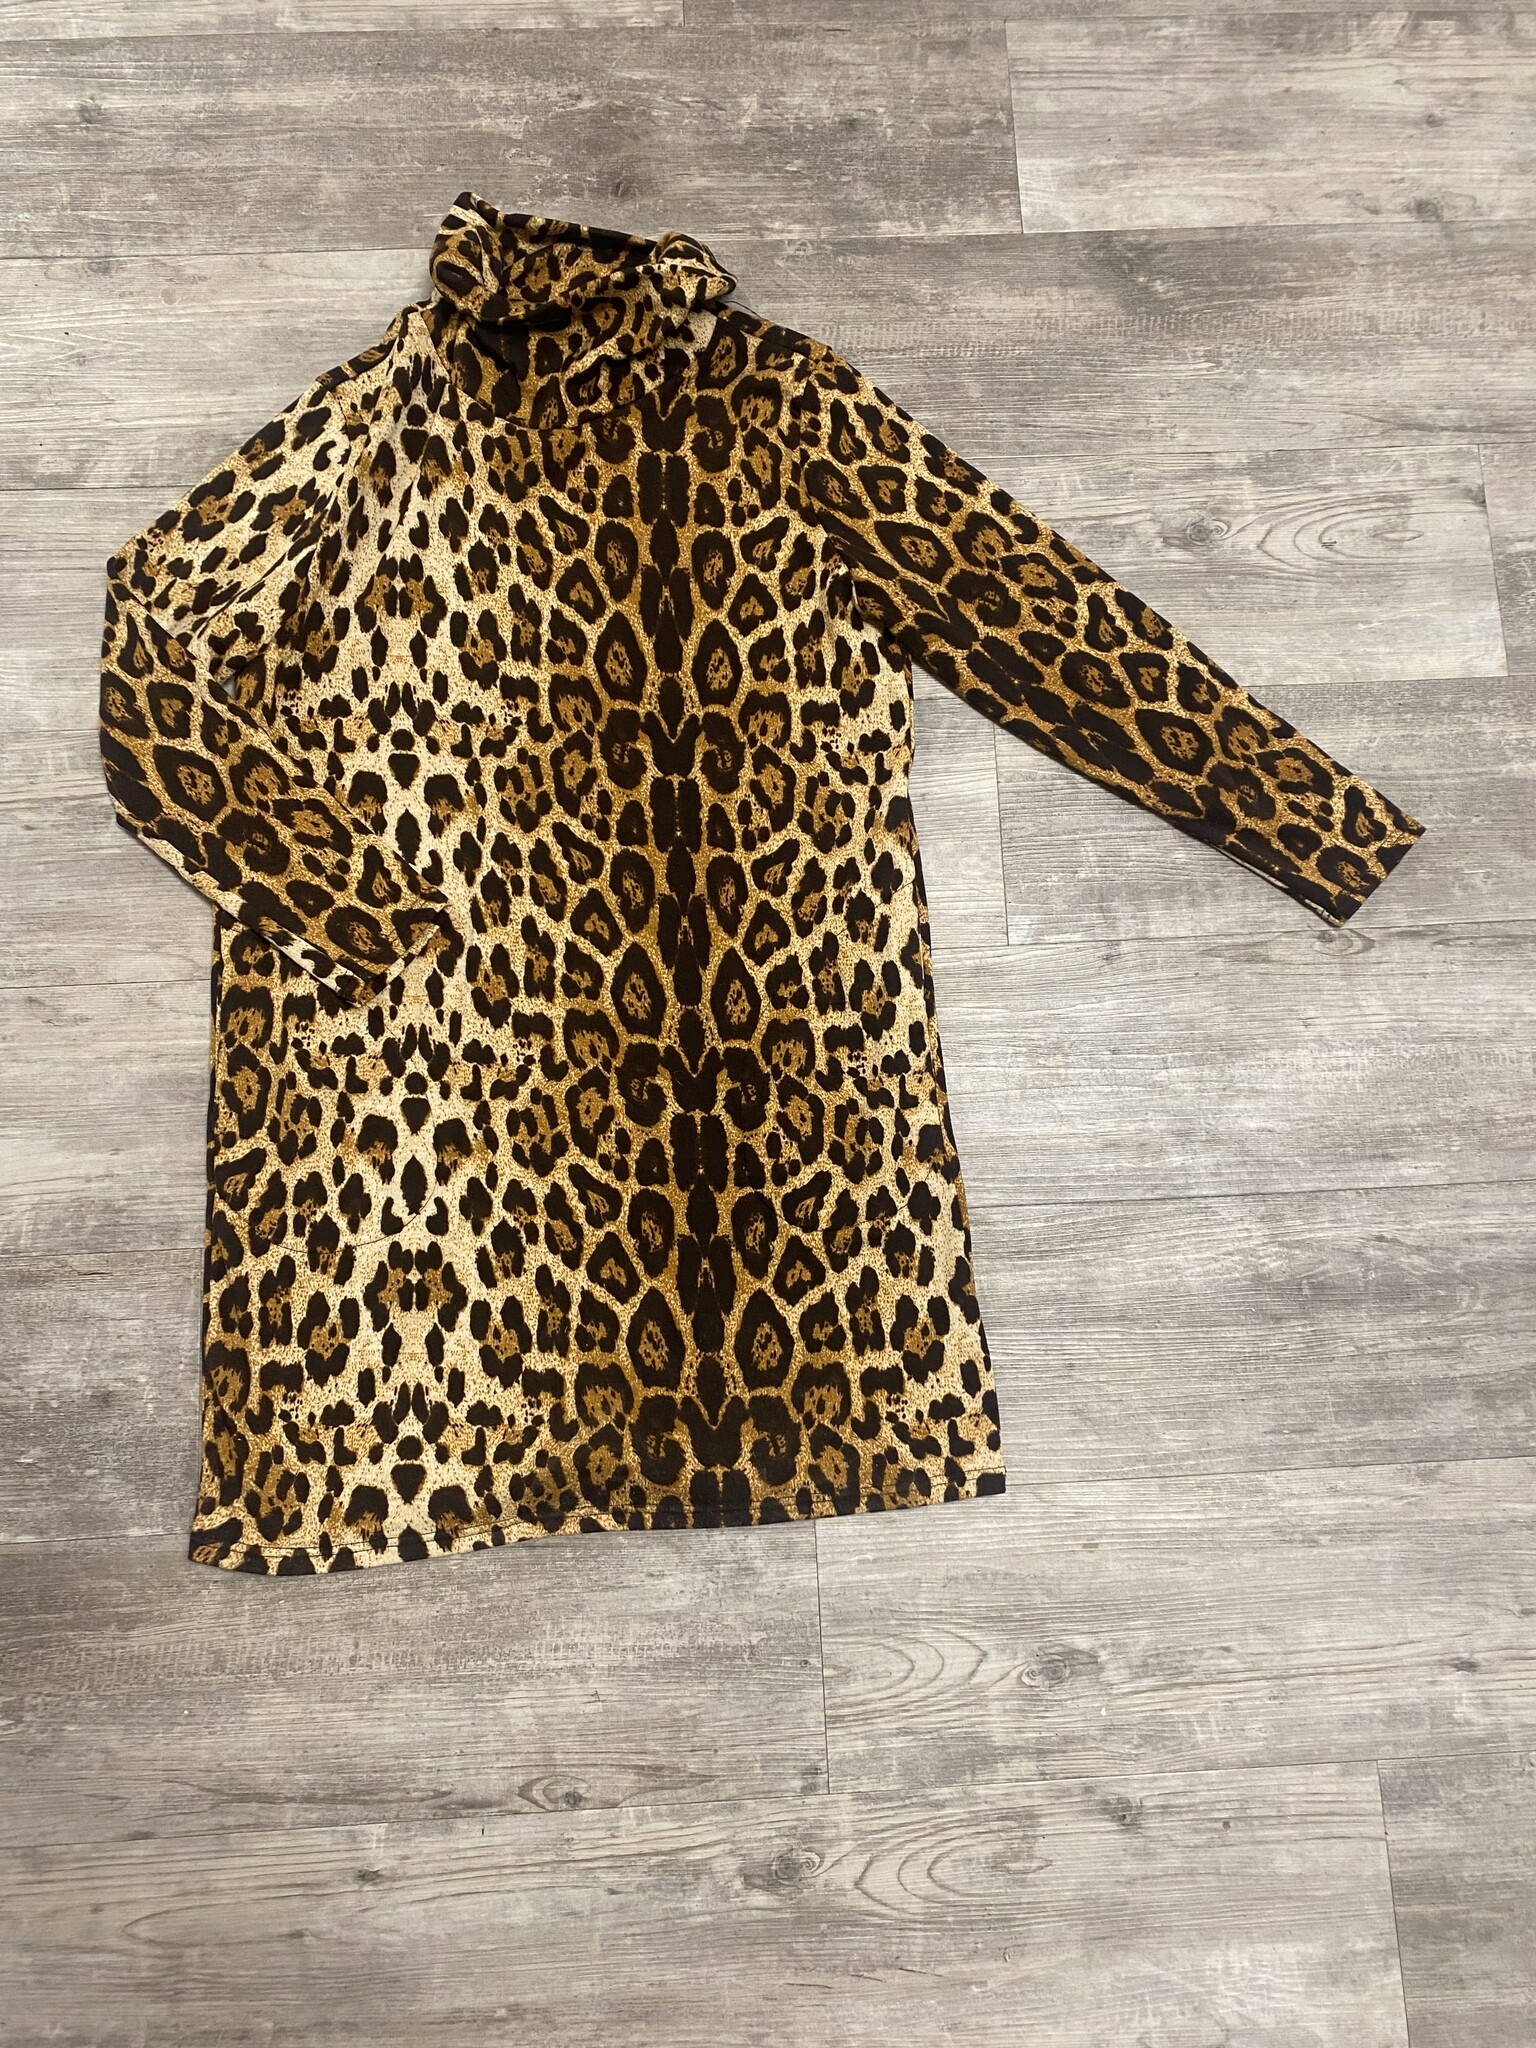 Leopard Dress with Cuffed Neck - Size 44